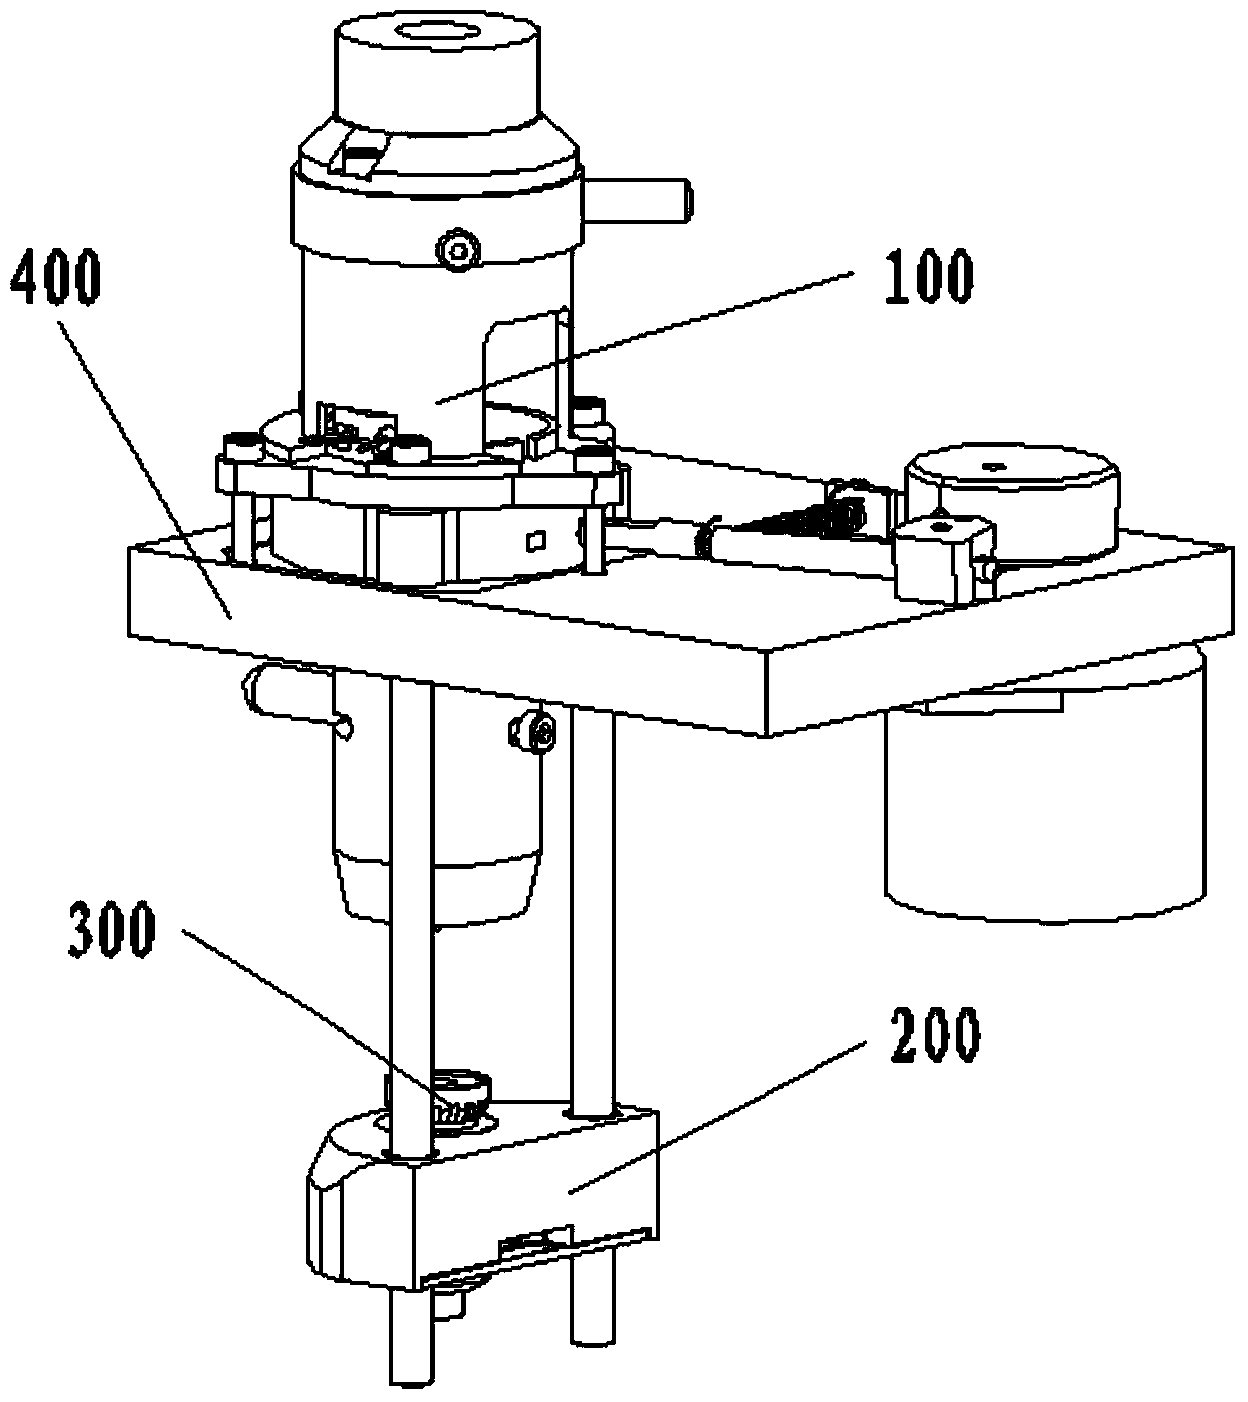 Monitoring device for viscoelastic strength of blood